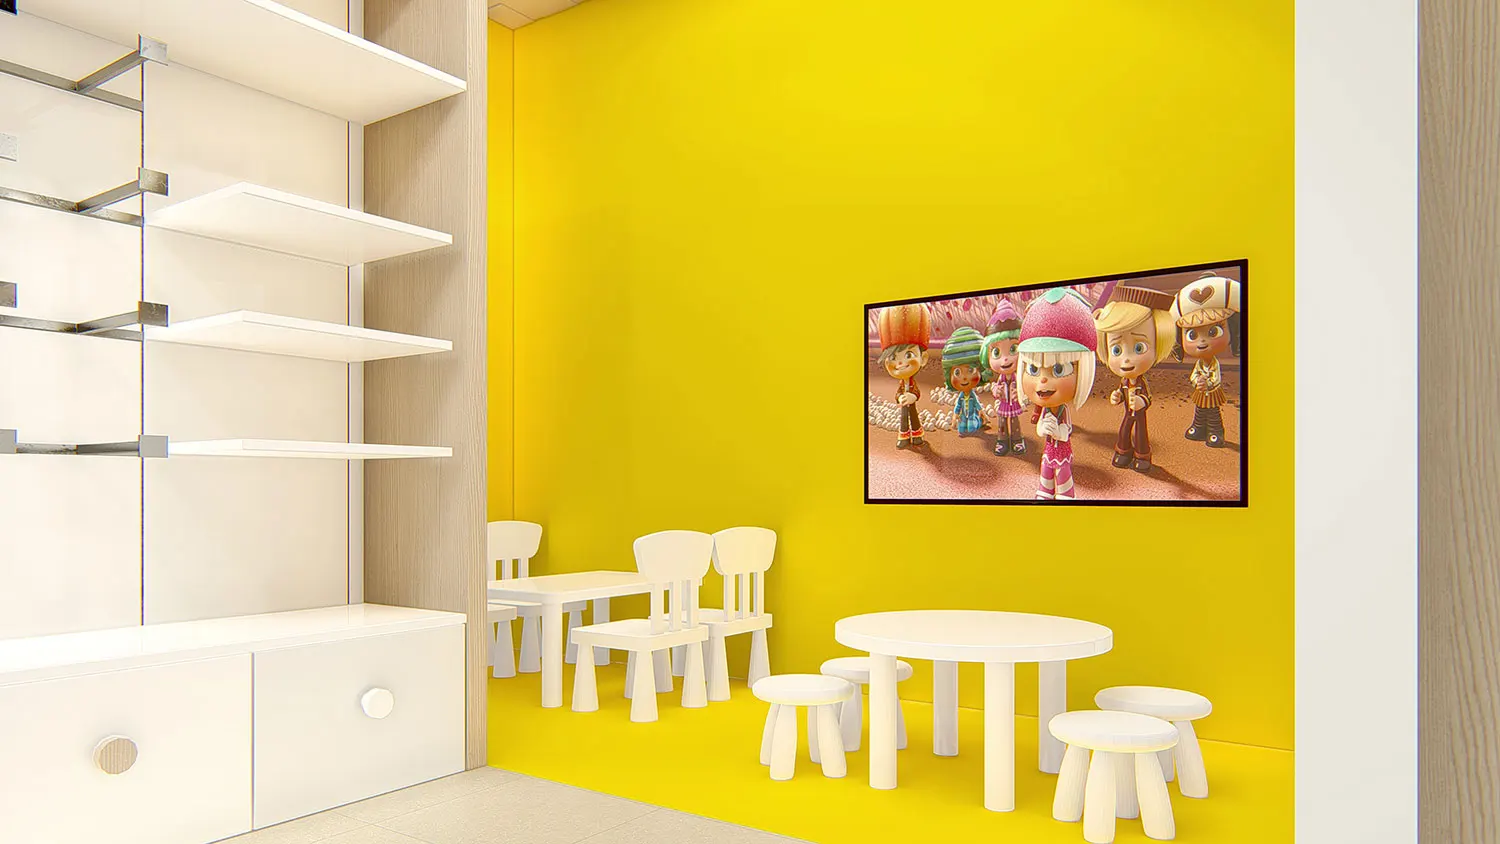 Interior design project for Modakids. Designed 3D rendering  to create a trendy retail store